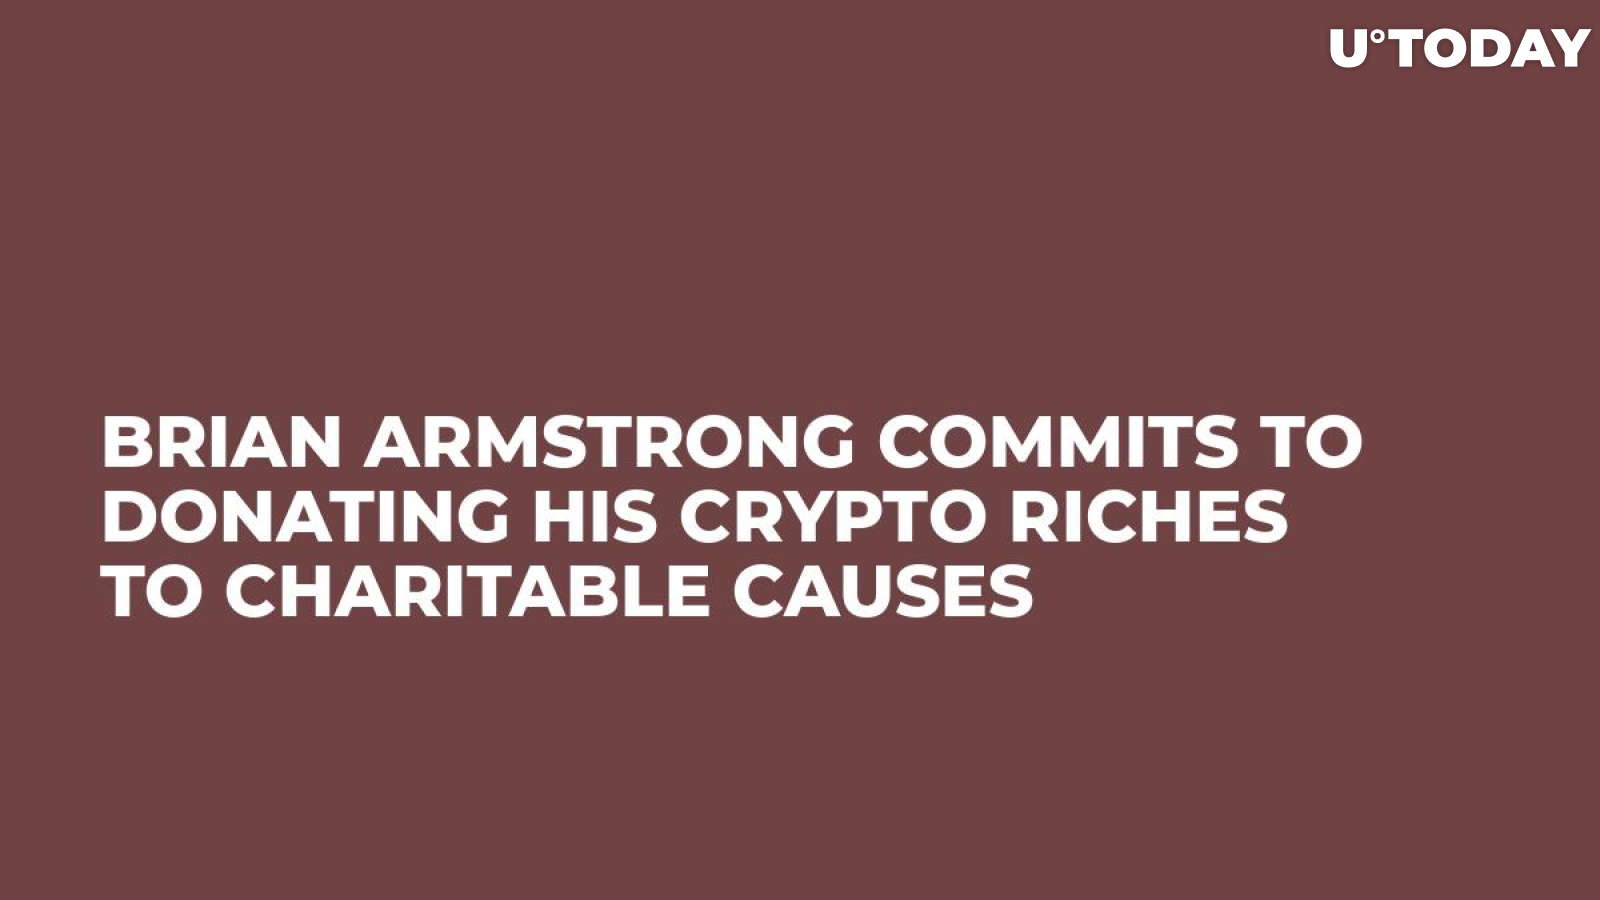 Brian Armstrong Commits to Donating His Crypto Riches to Charitable Causes 